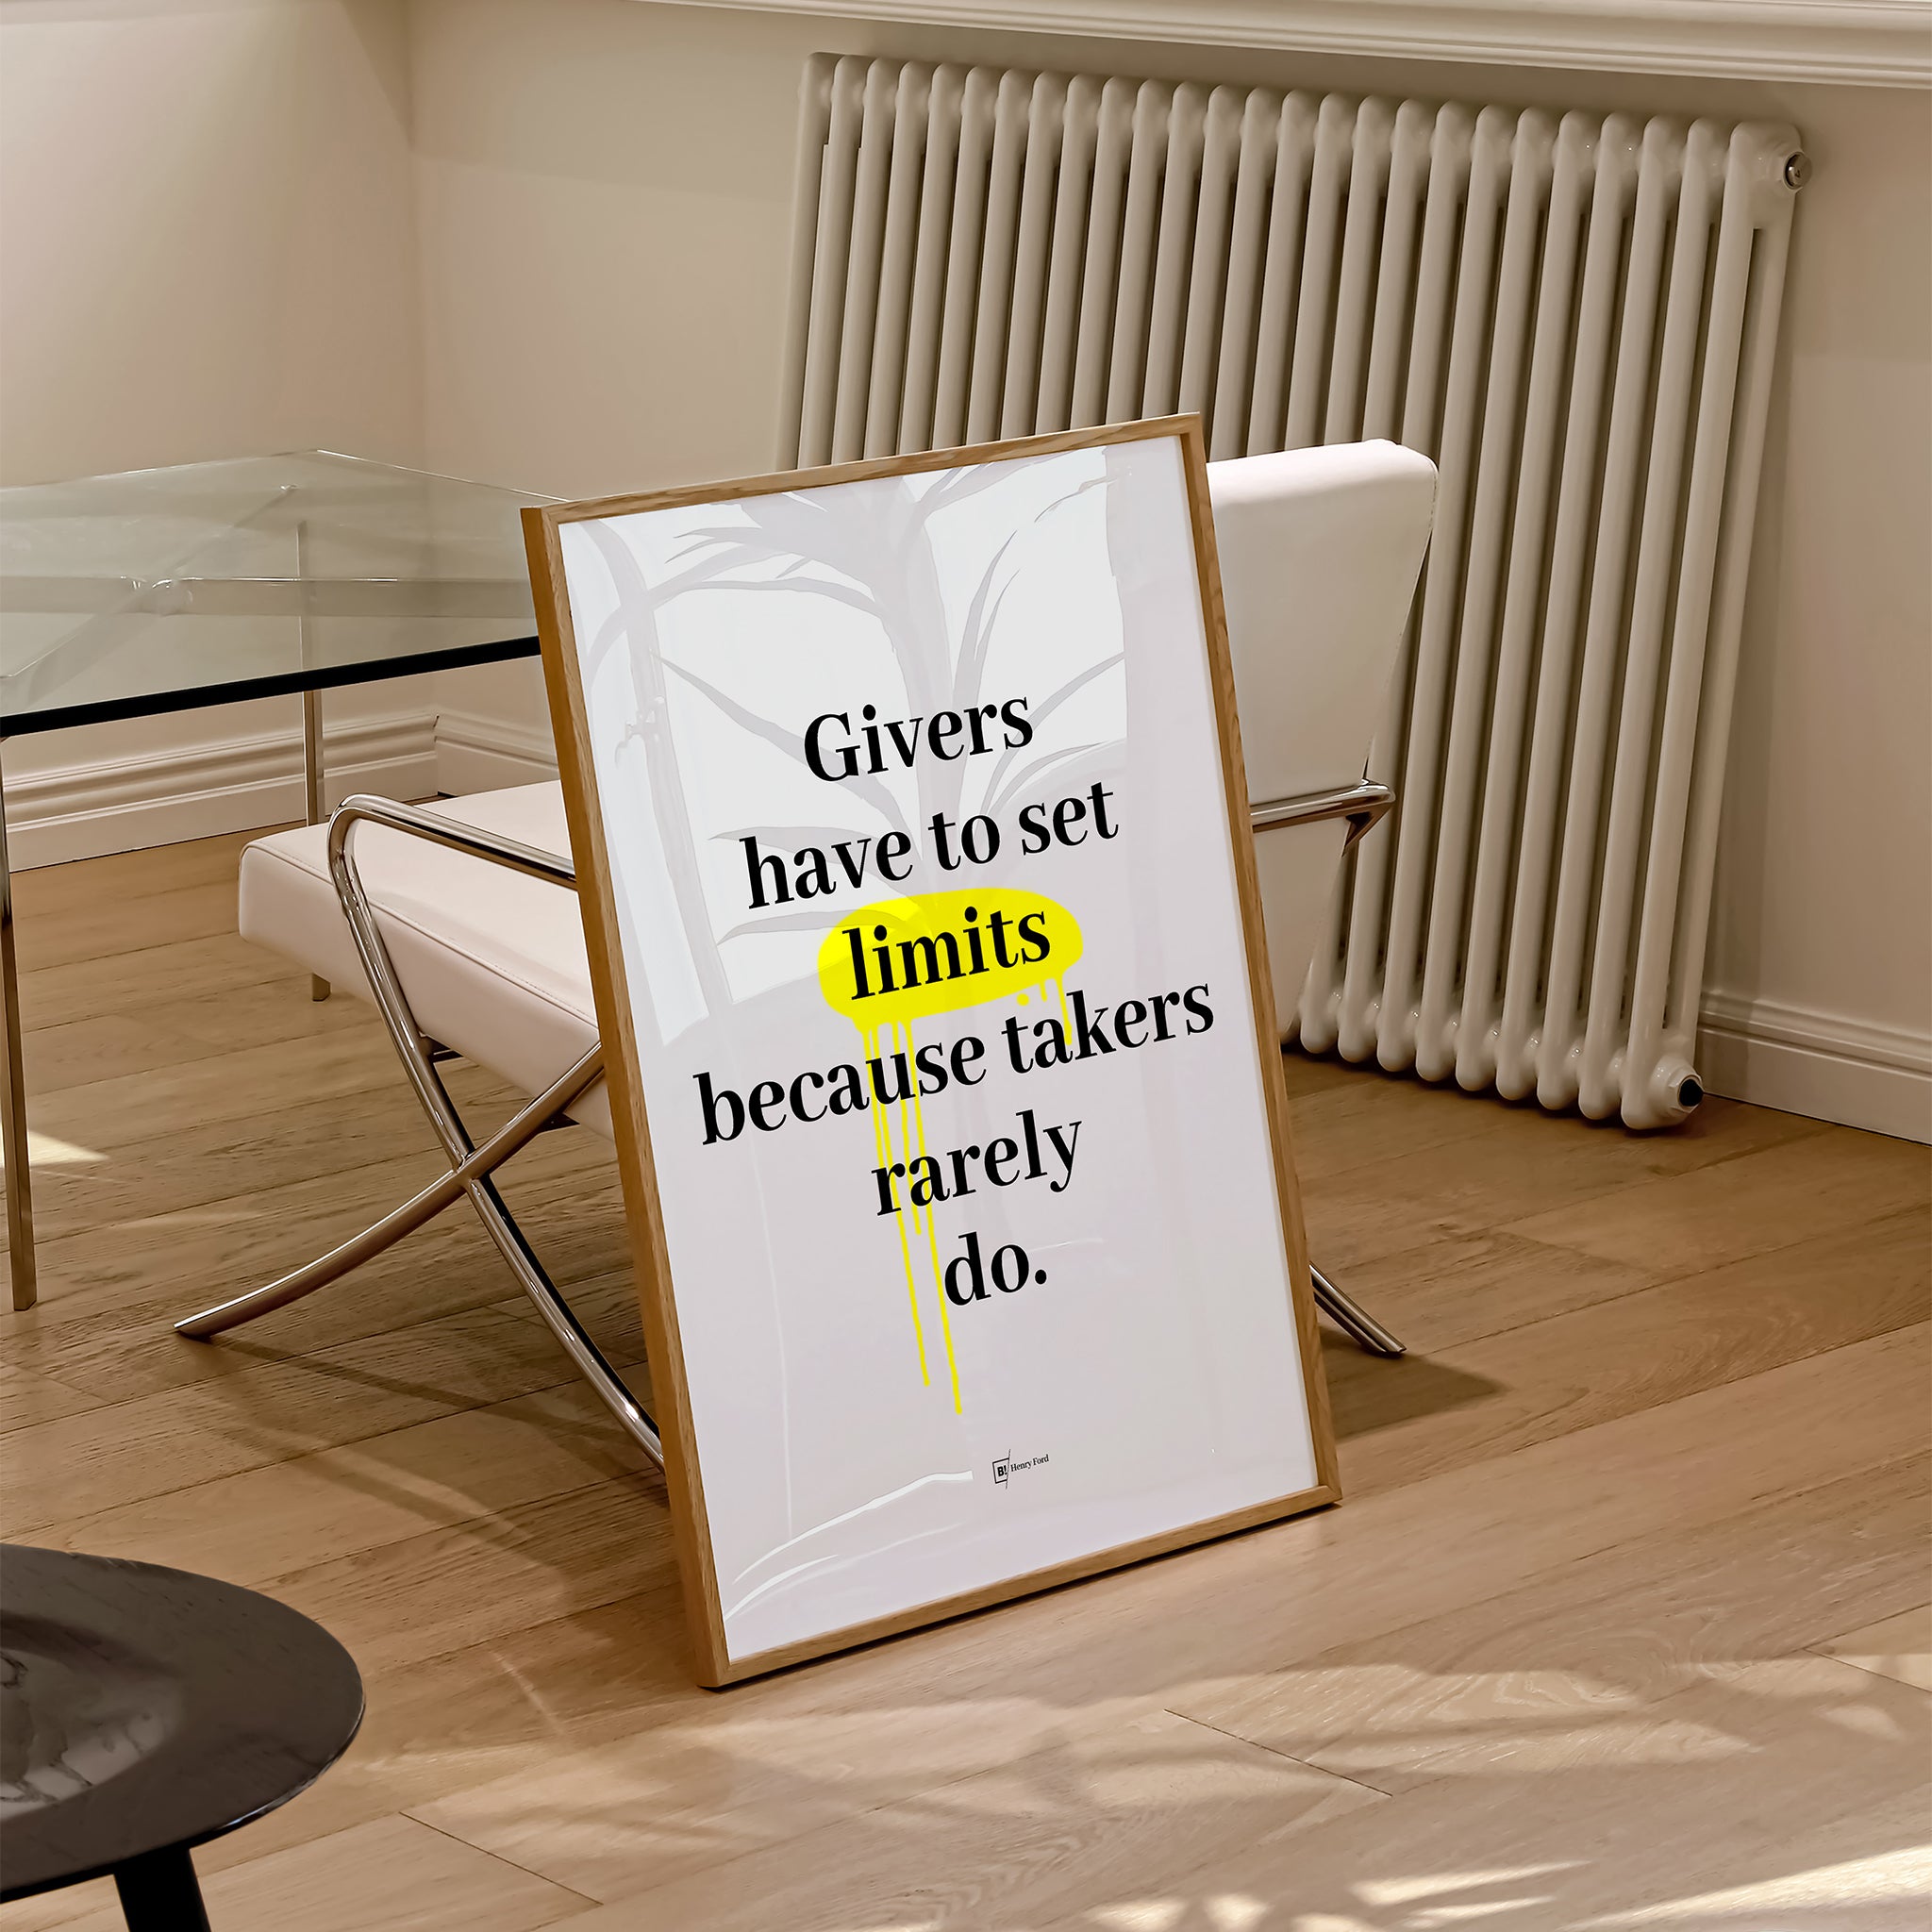 Be inspired by Henry Ford's famous "Givers have to set limits because takers rarely do" quote art print. This artwork was printed using the giclée process on archival acid-free paper and is presented in a natural oak frame that captures its timeless beauty in every detail.